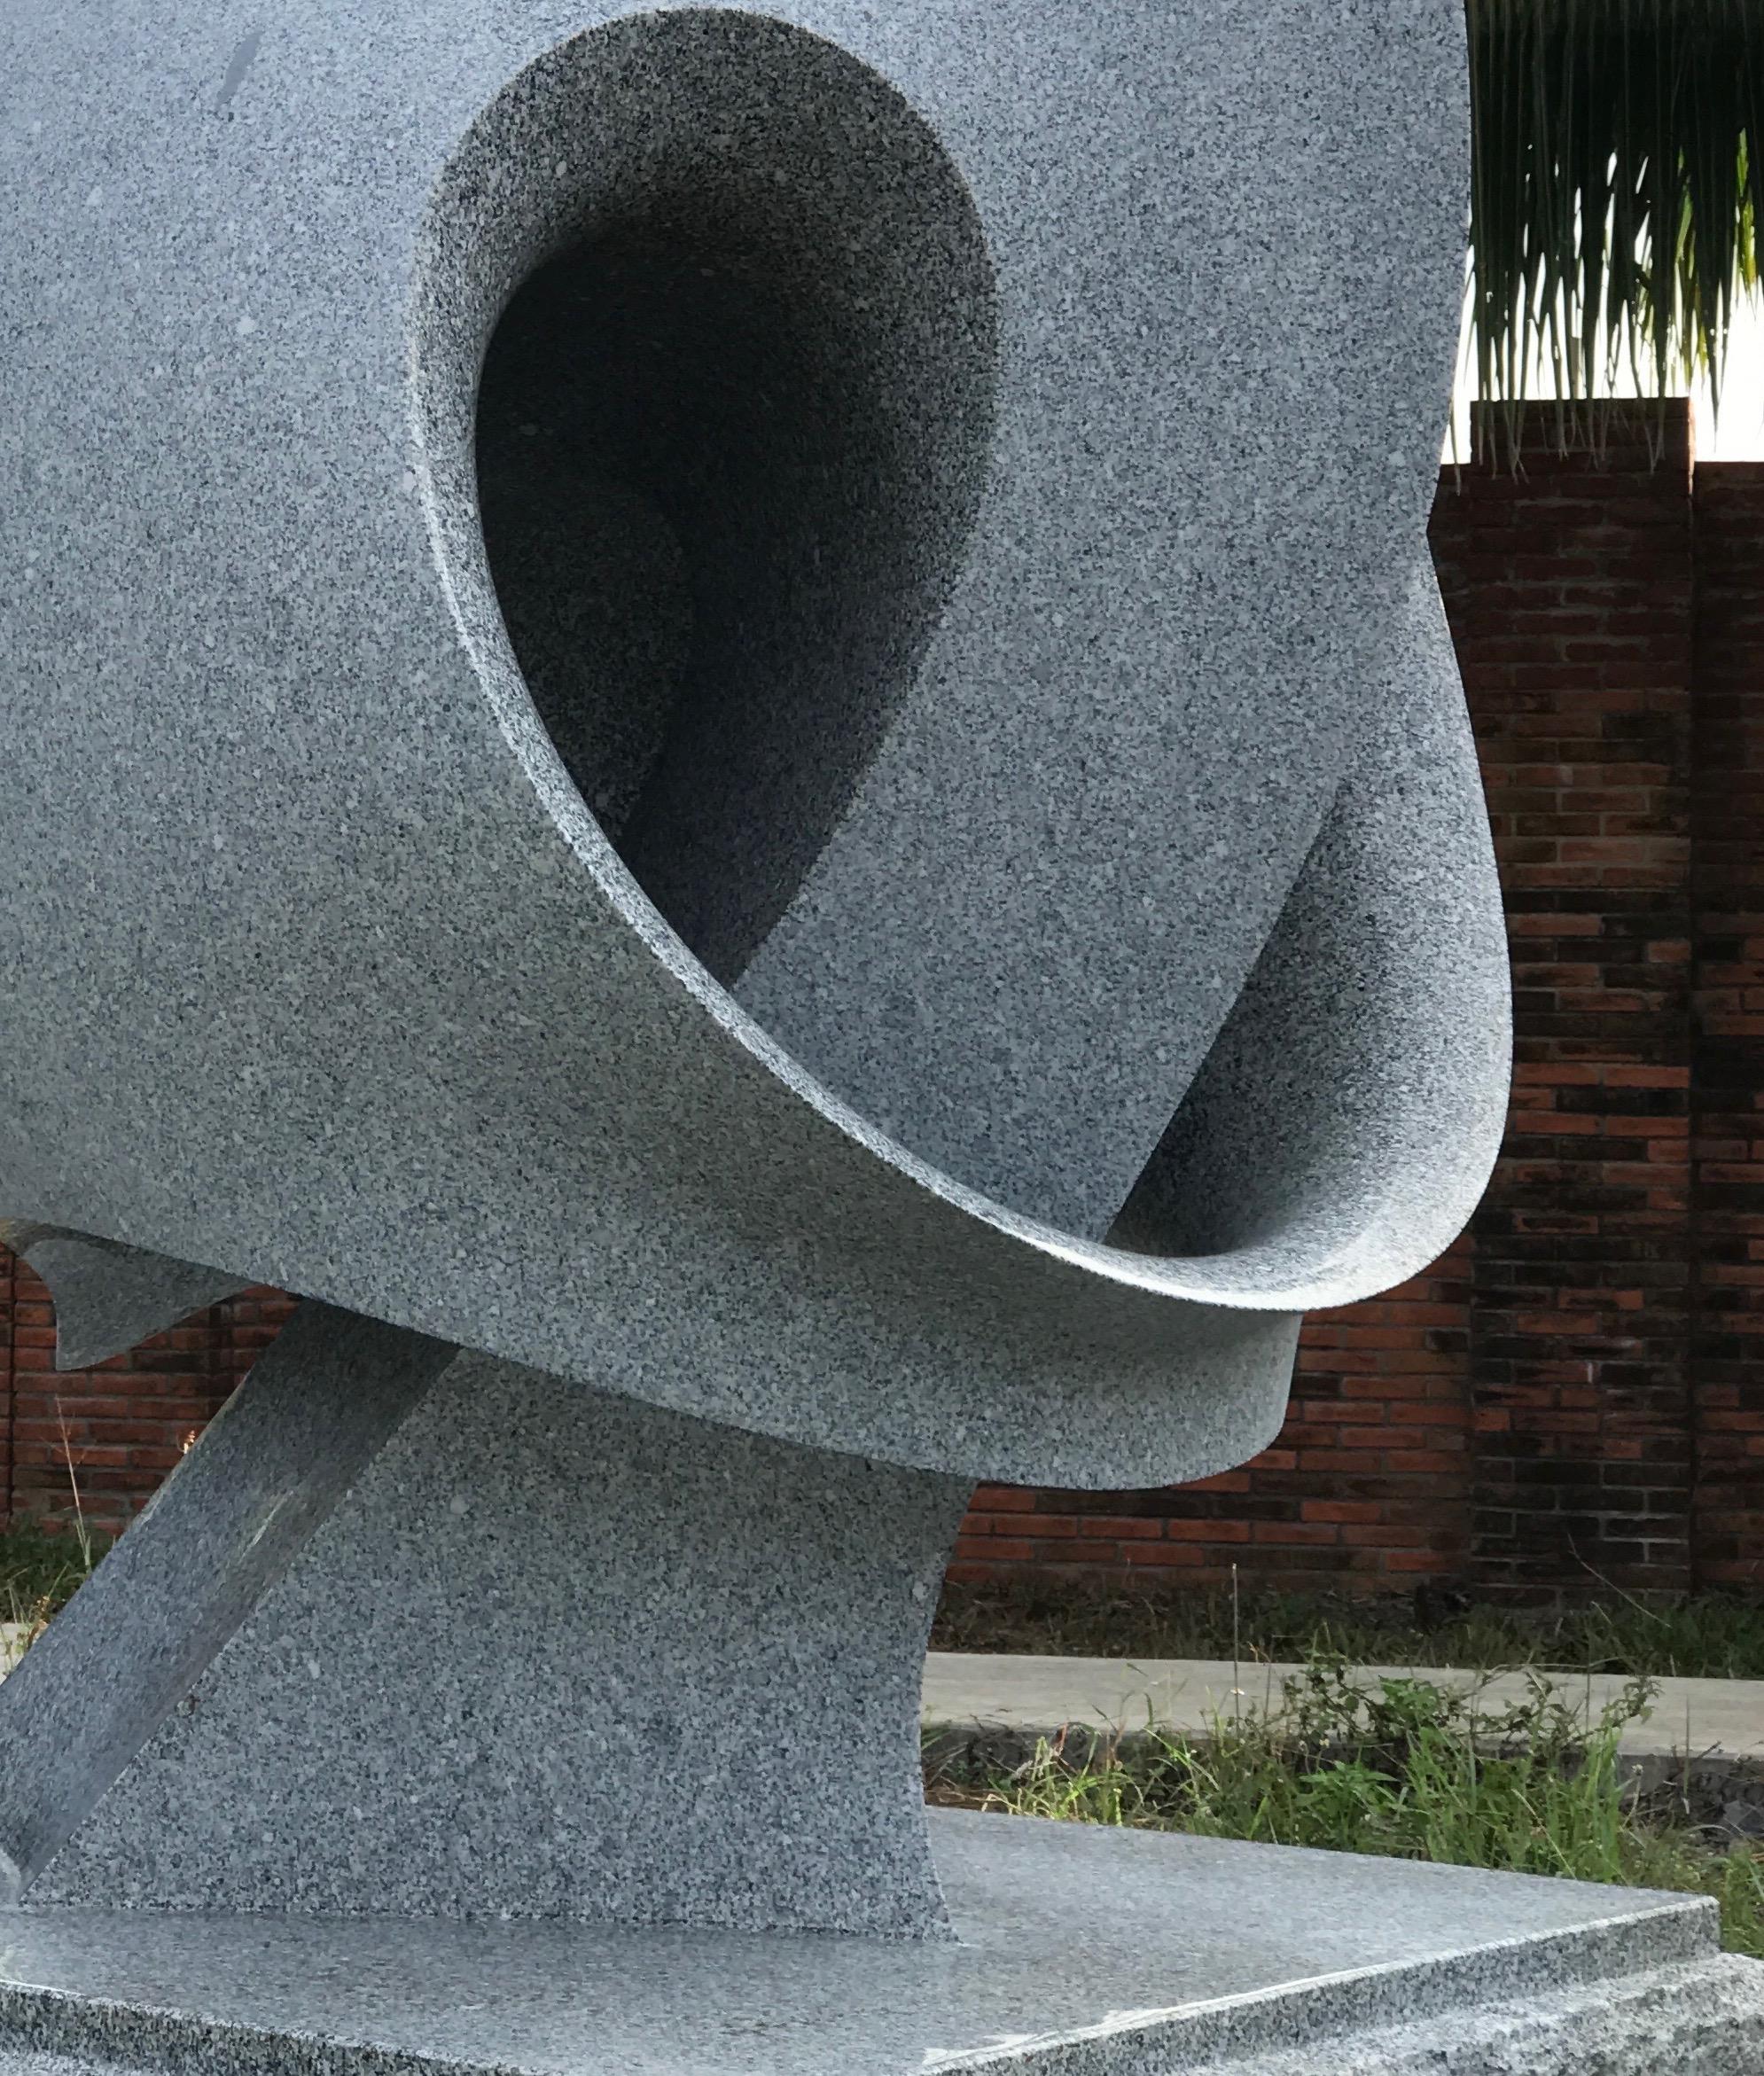 Night by Khang Pham-New, large abstract granite sculpture, grey, white, polished

This sculpture will take extra time for delivery. Coordination with 1st Dibs shipping team is required for delivery.

Khang Pham-New studied at the Ontario College of